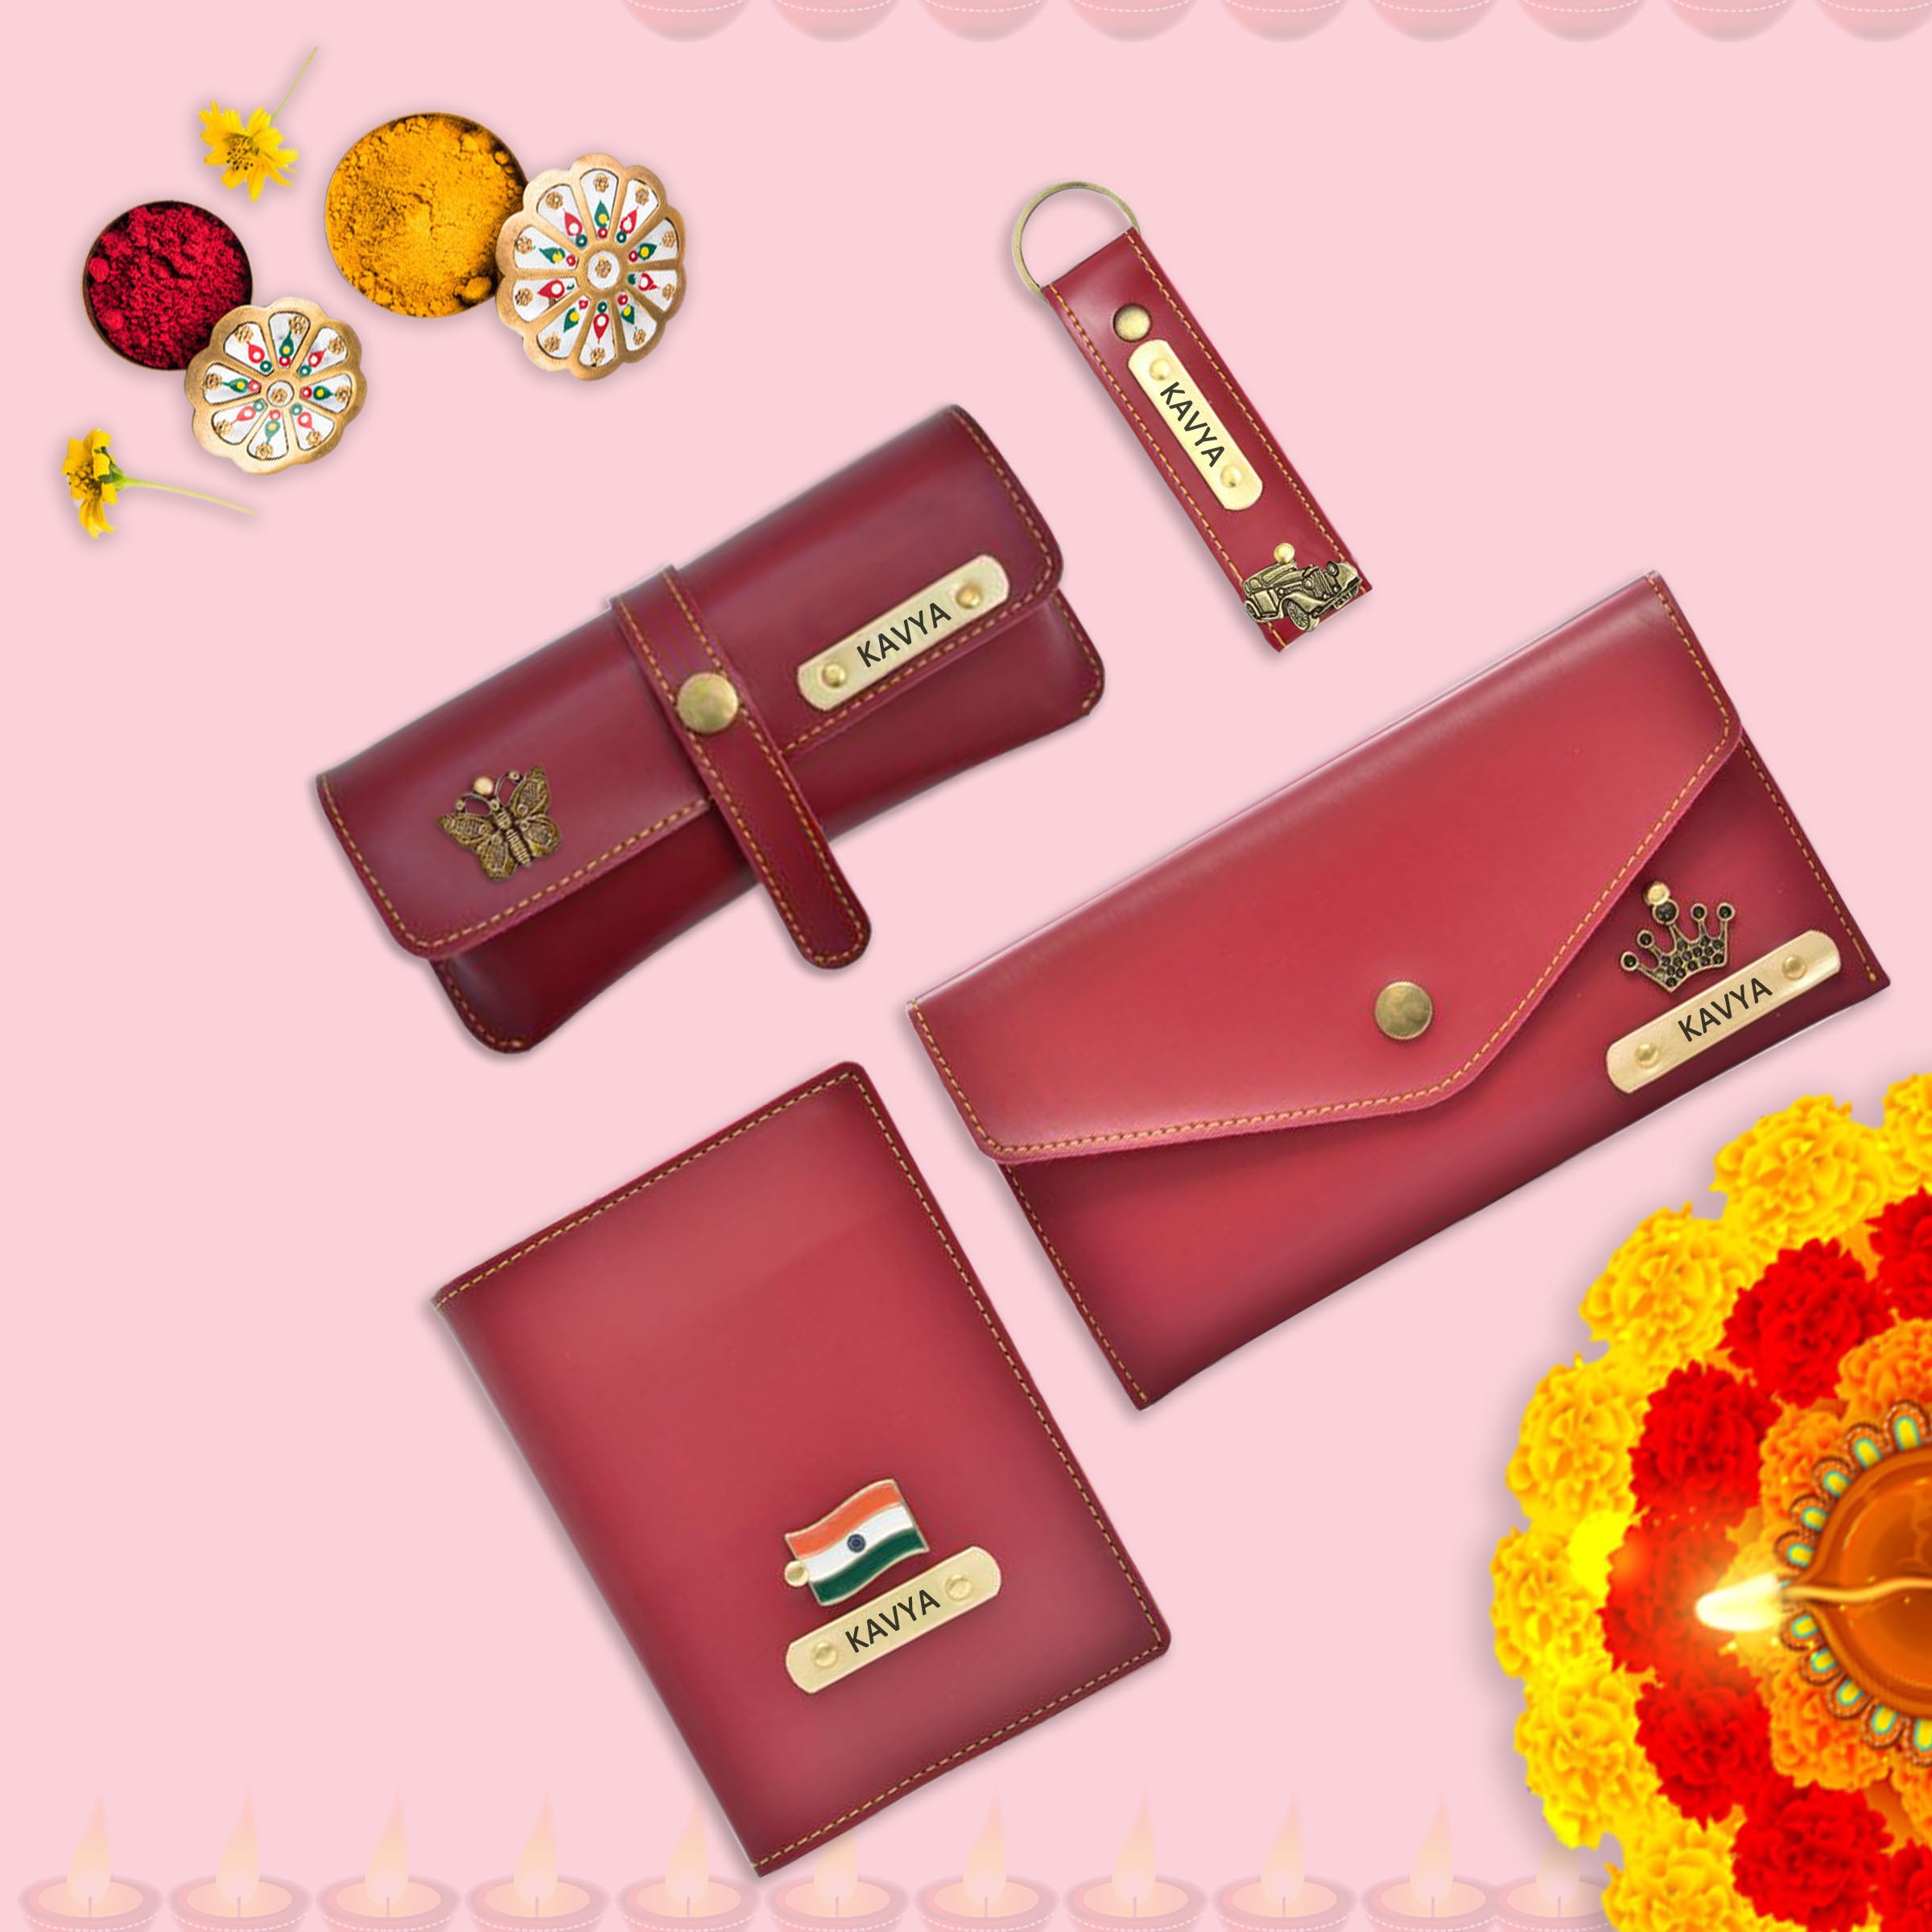 5 Blooming Flower Jewellery Sets As a Romantic Diwali Gift for Wife – GIVA  Jewellery